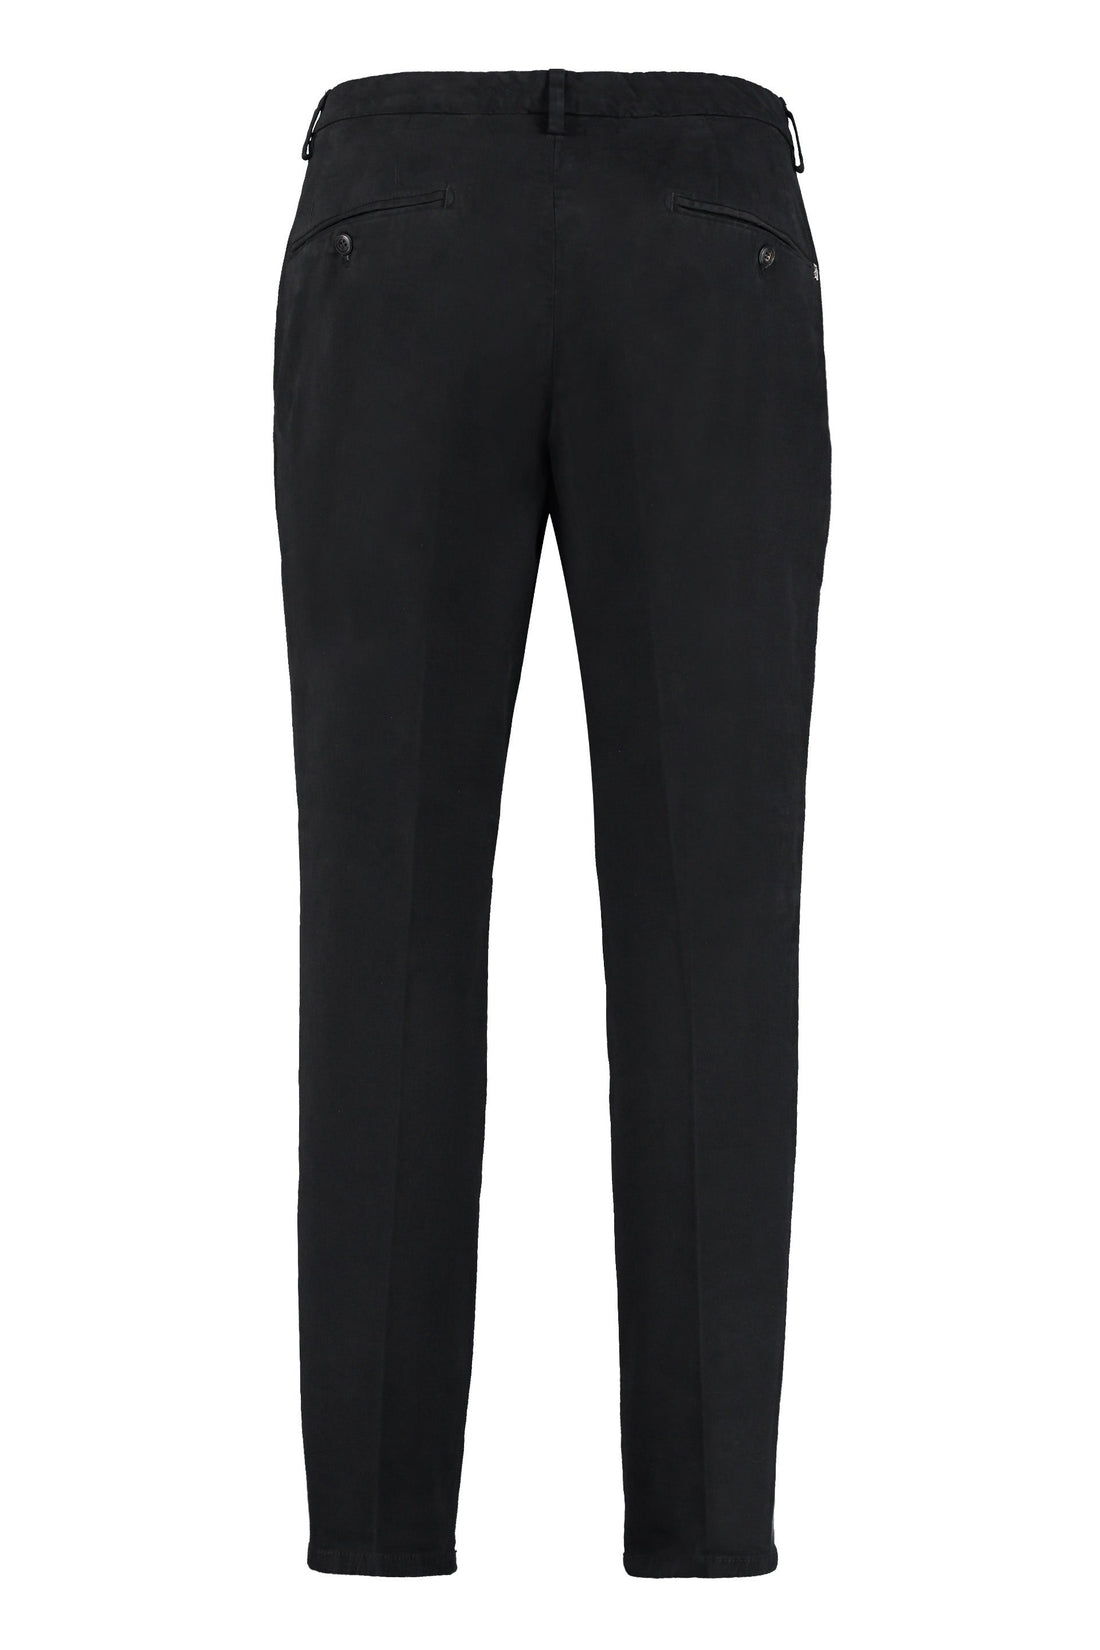 Dondup-OUTLET-SALE-Tyler cotton Chino trousers-ARCHIVIST